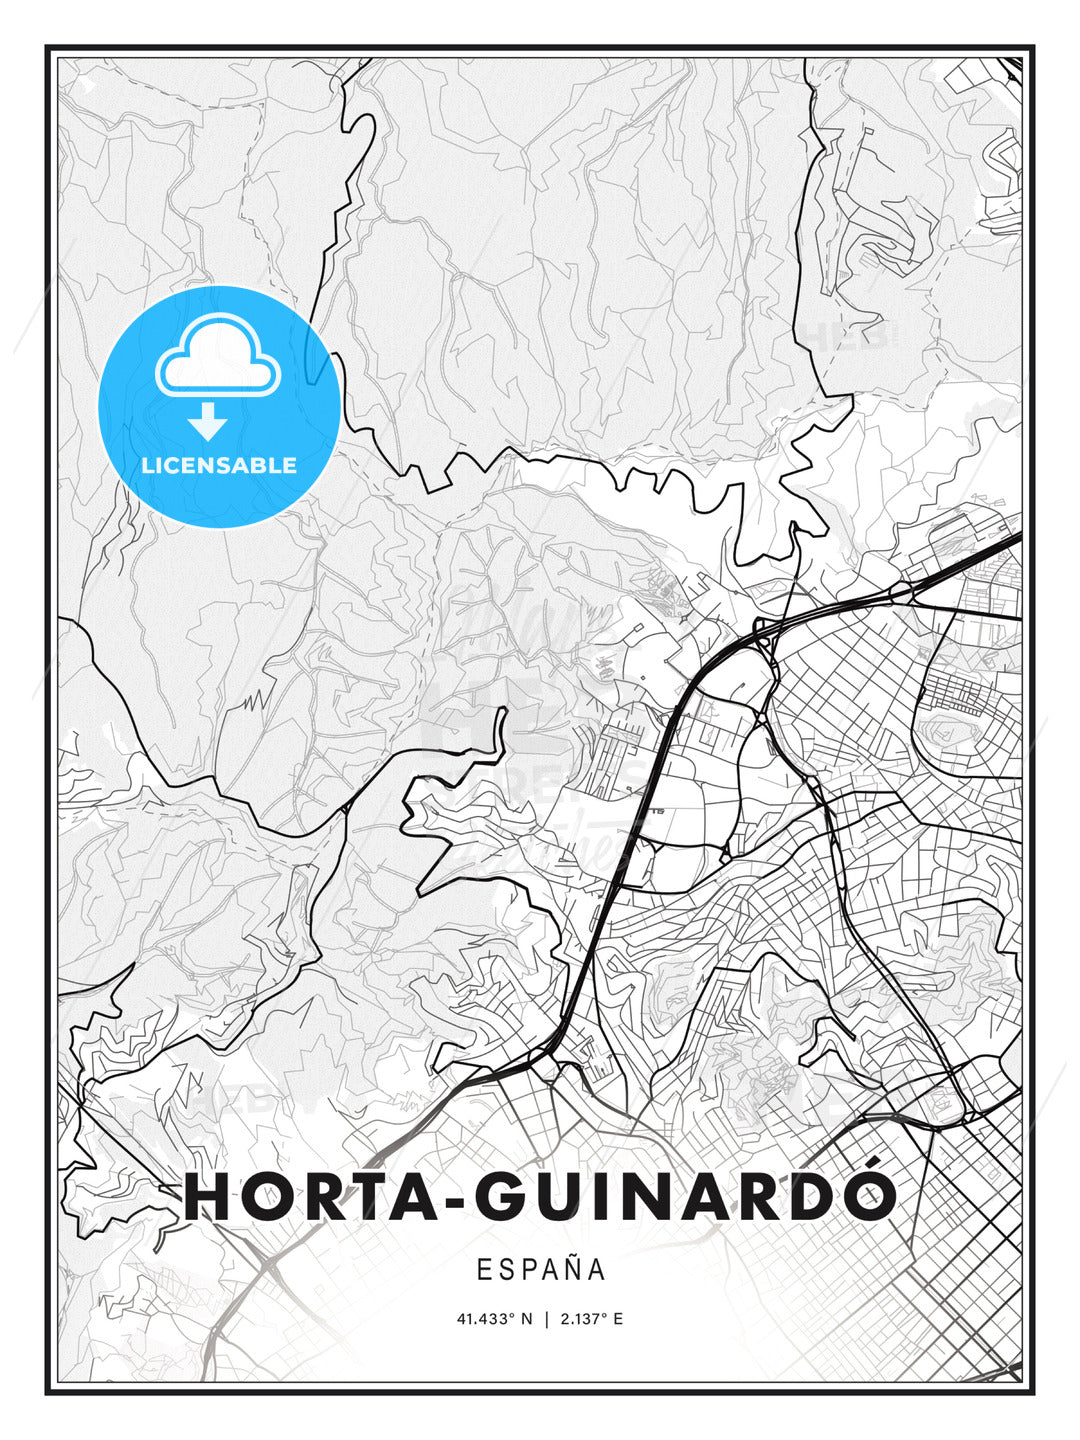 Horta-Guinardó, Spain, Modern Print Template in Various Formats - HEBSTREITS Sketches